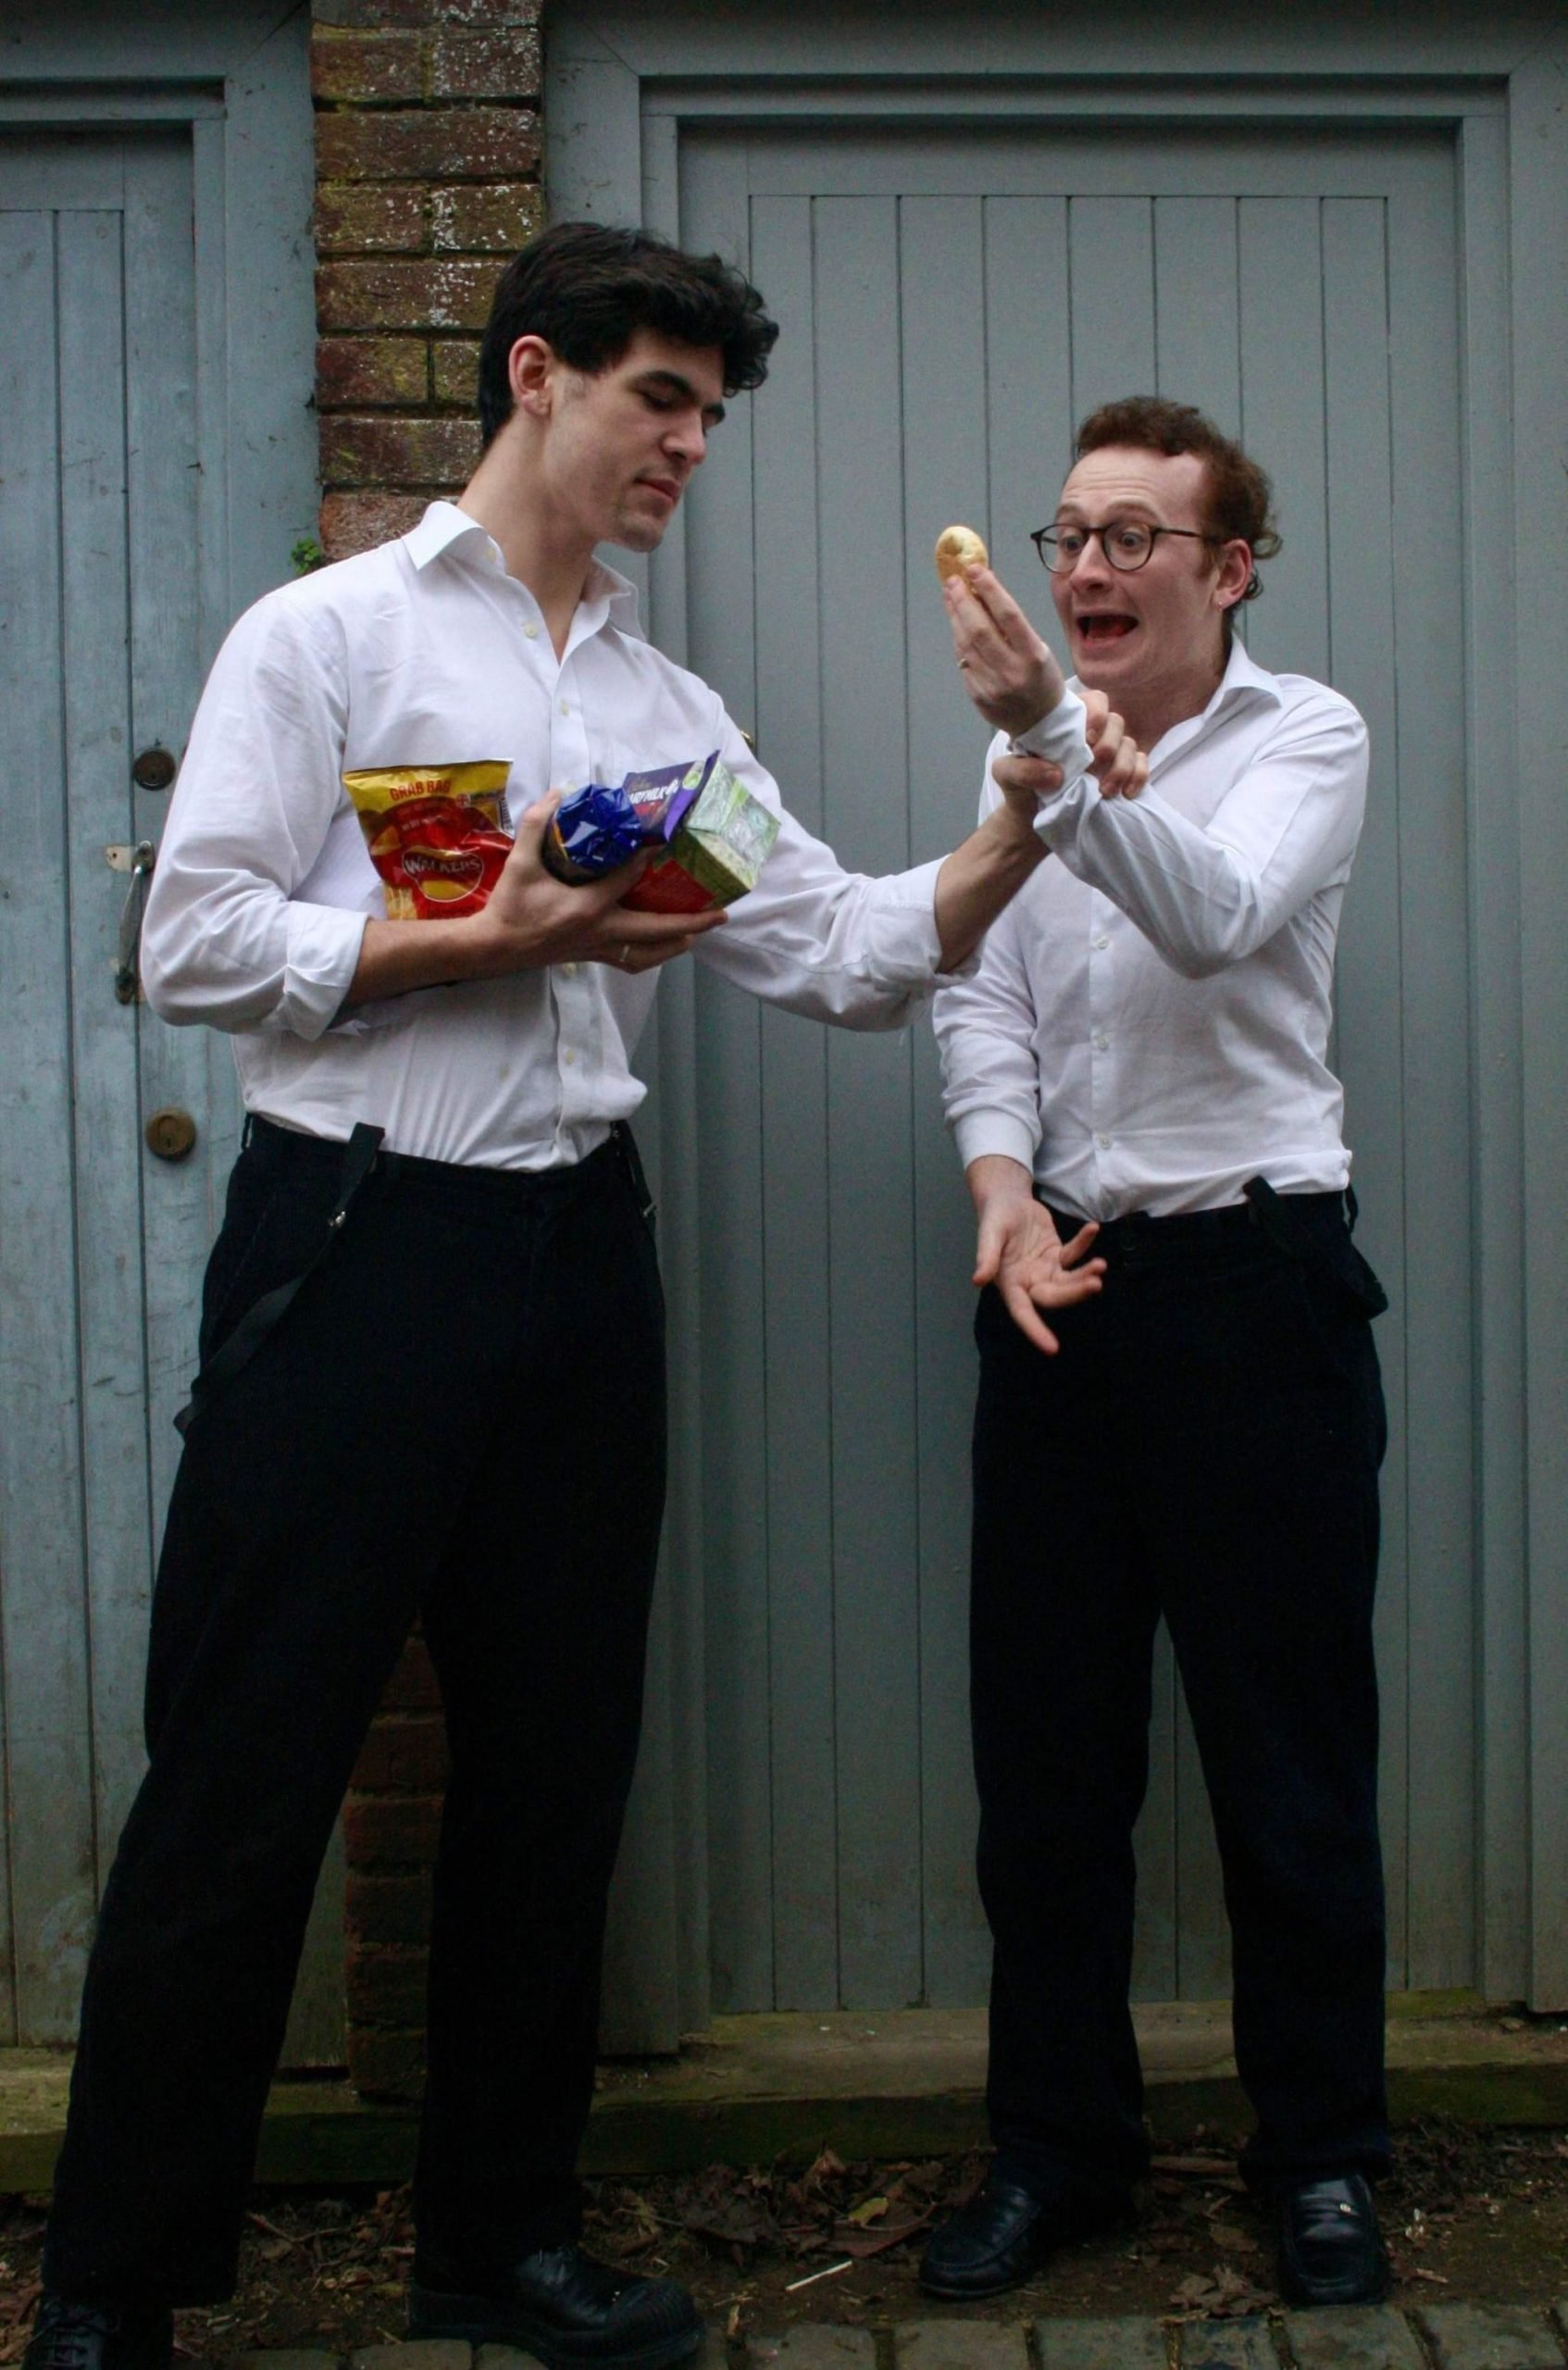 A man in a white shirt holds an armful of snacks and grabs the wrist of another man in a white shirt, who is holding an Edcles cake and looking scared.